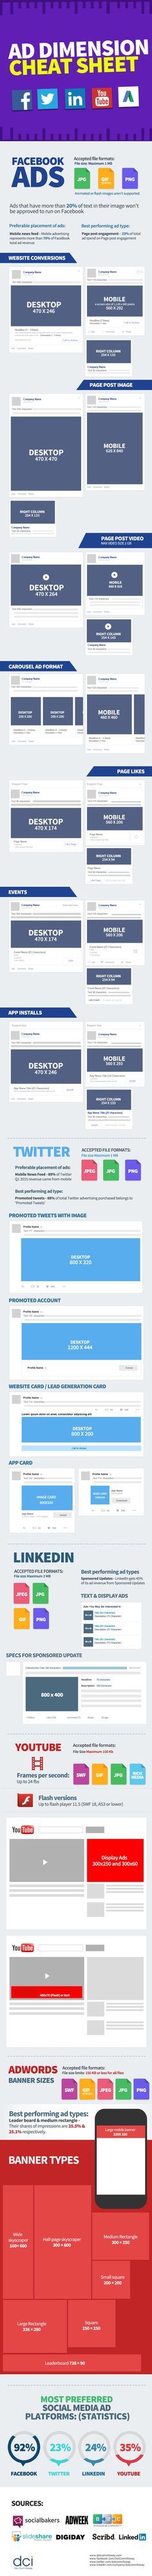 Advertising-Infographics-Searching-for-social-media-ad-sizes-This-complete-cheat-sheet-includes-36-sizes Advertising Infographics : Searching for social media ad sizes? This complete cheat sheet includes 36 sizes...